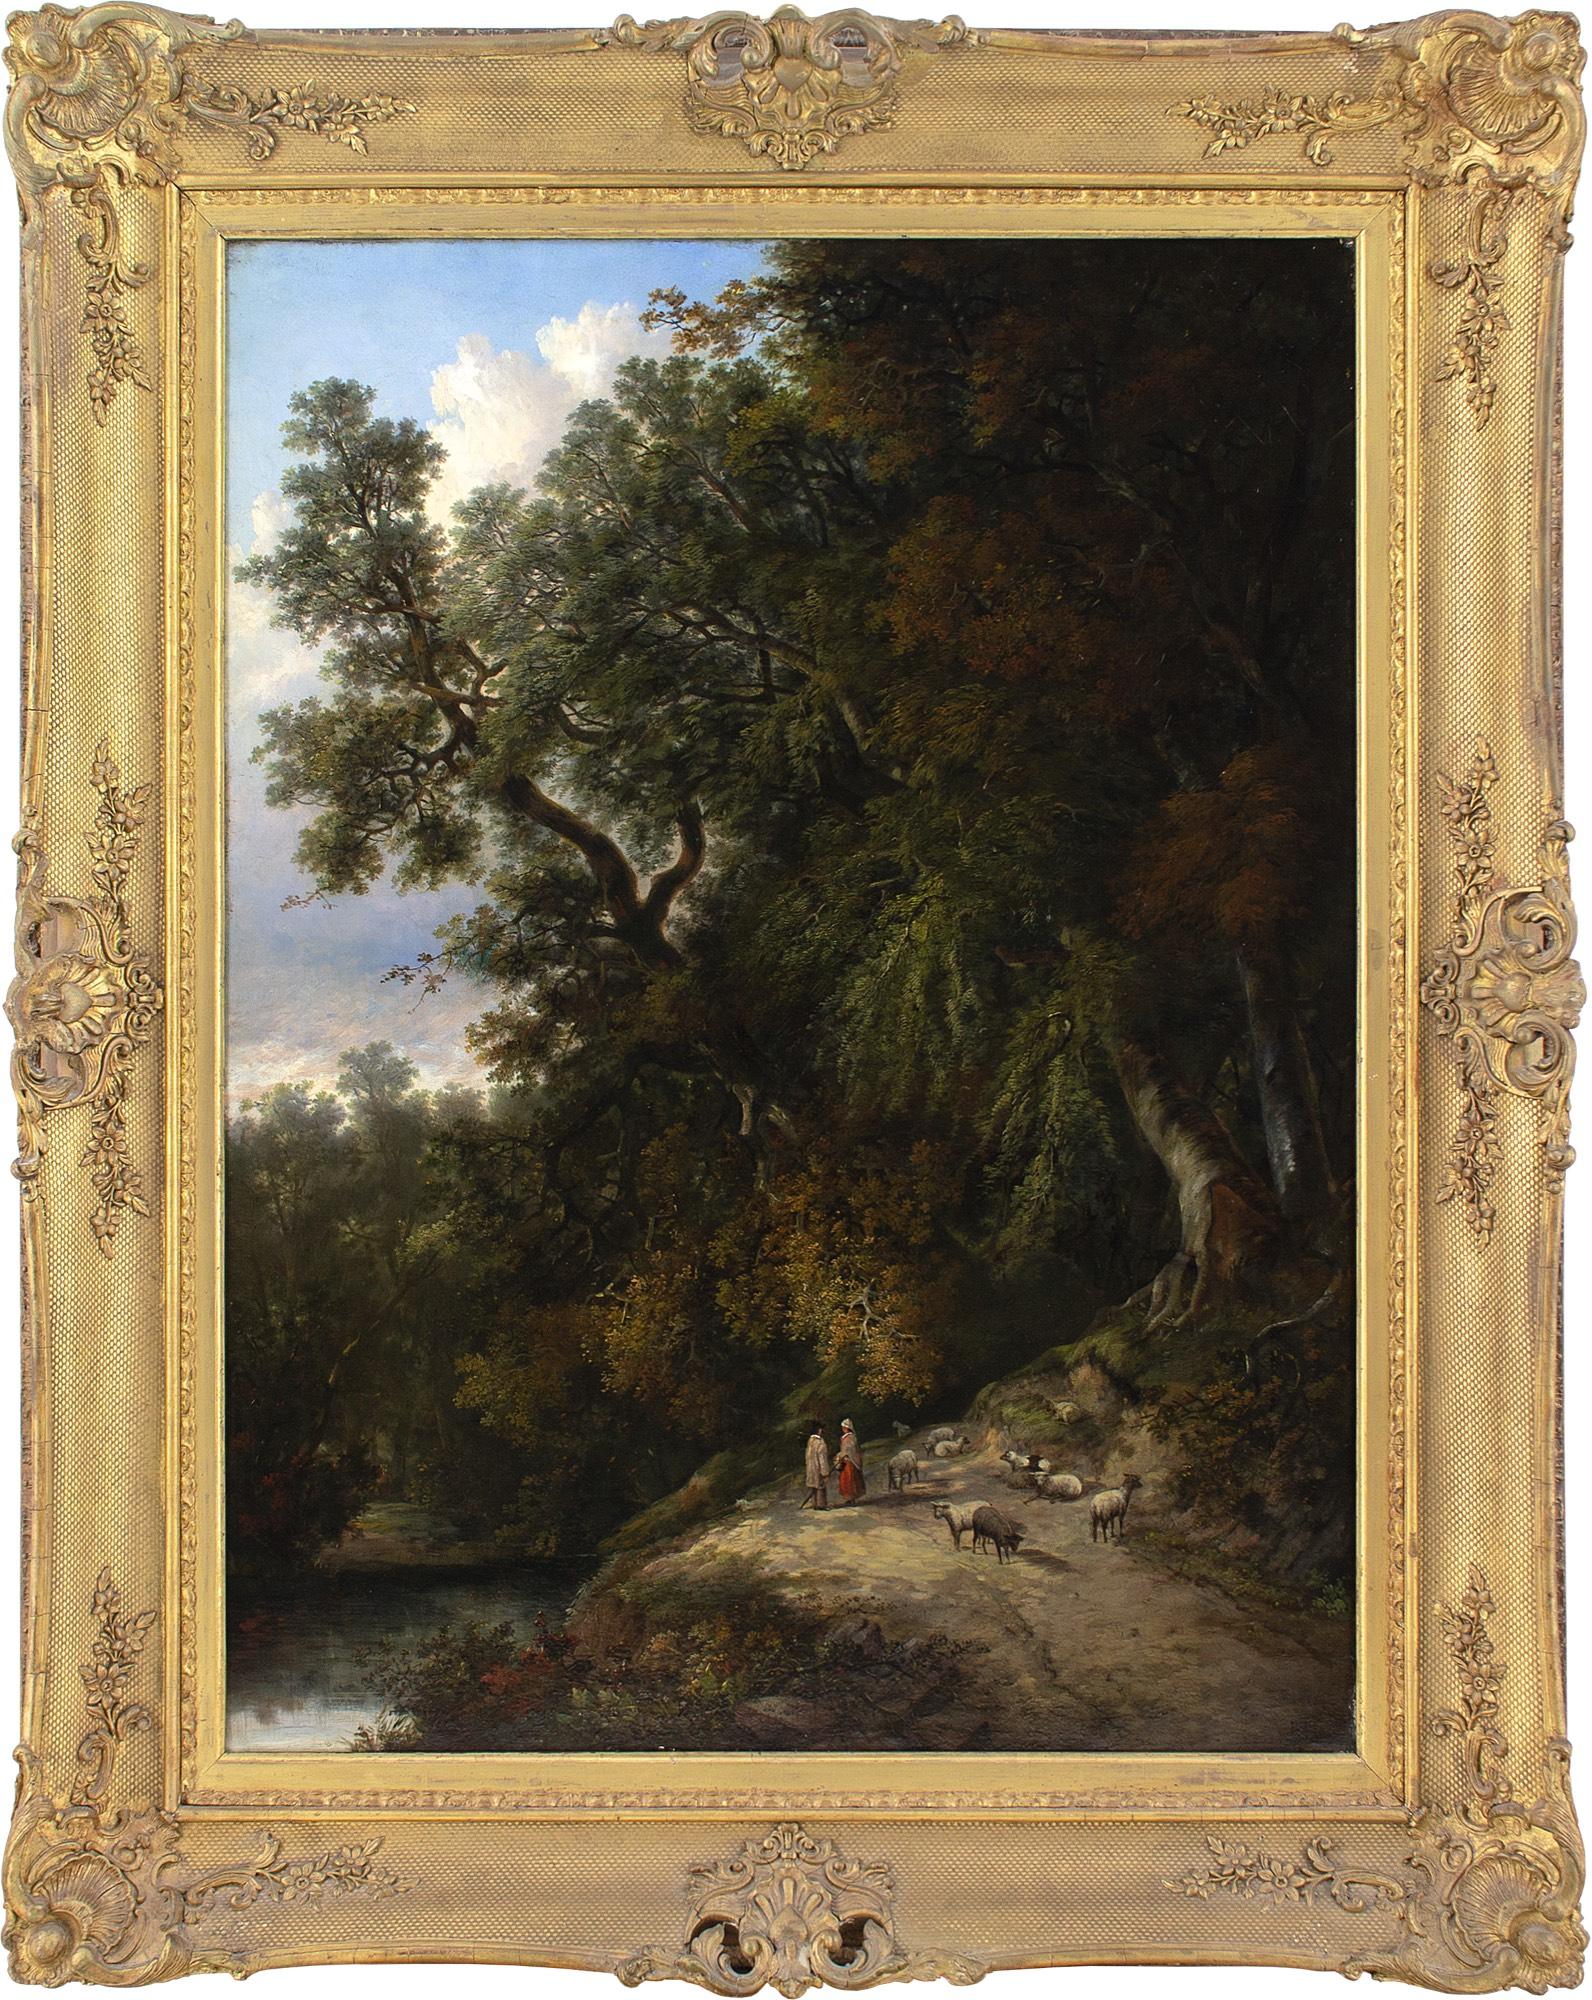 This mid-19th-century oil painting by British artist Henry Ladbrooke (1800-1869) depicts a woodland view near Walsingham in Norfolk. It was exhibited at Norwich Castle in October 1927 and the original exhibition catalogue is included with the